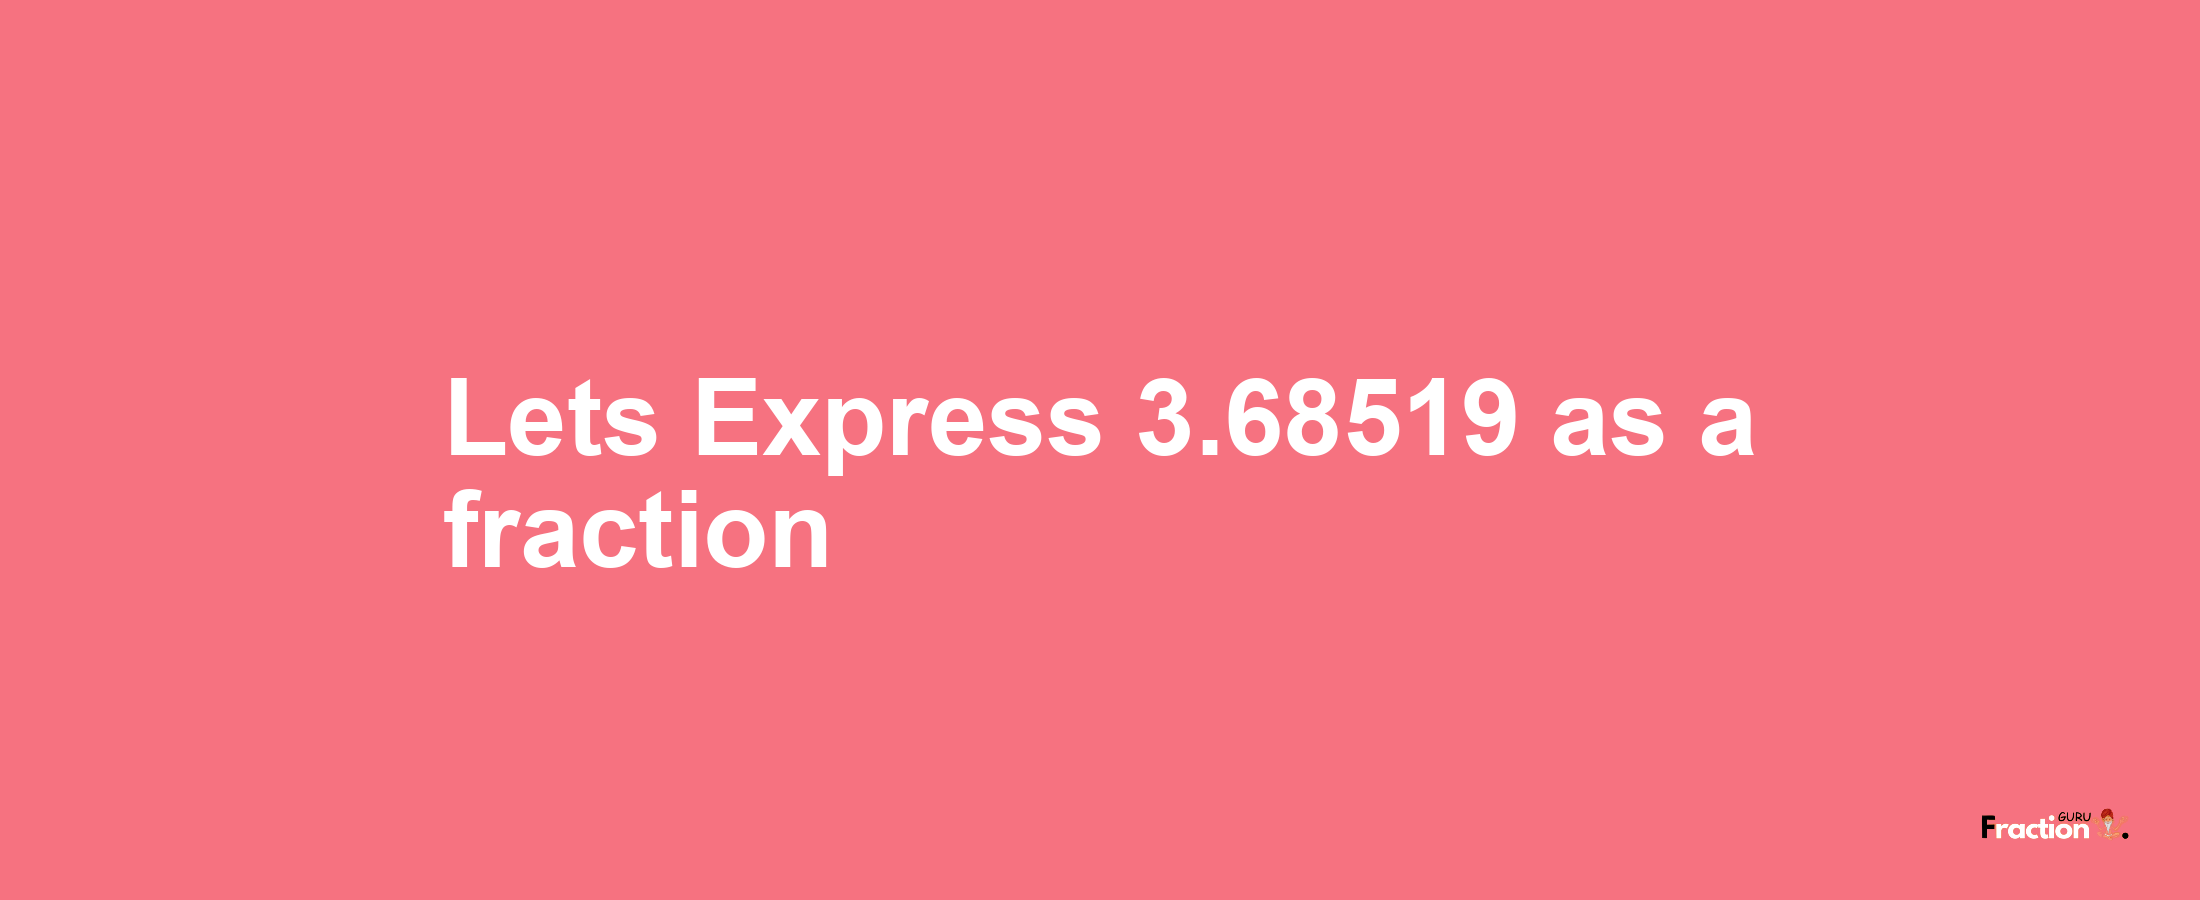 Lets Express 3.68519 as afraction